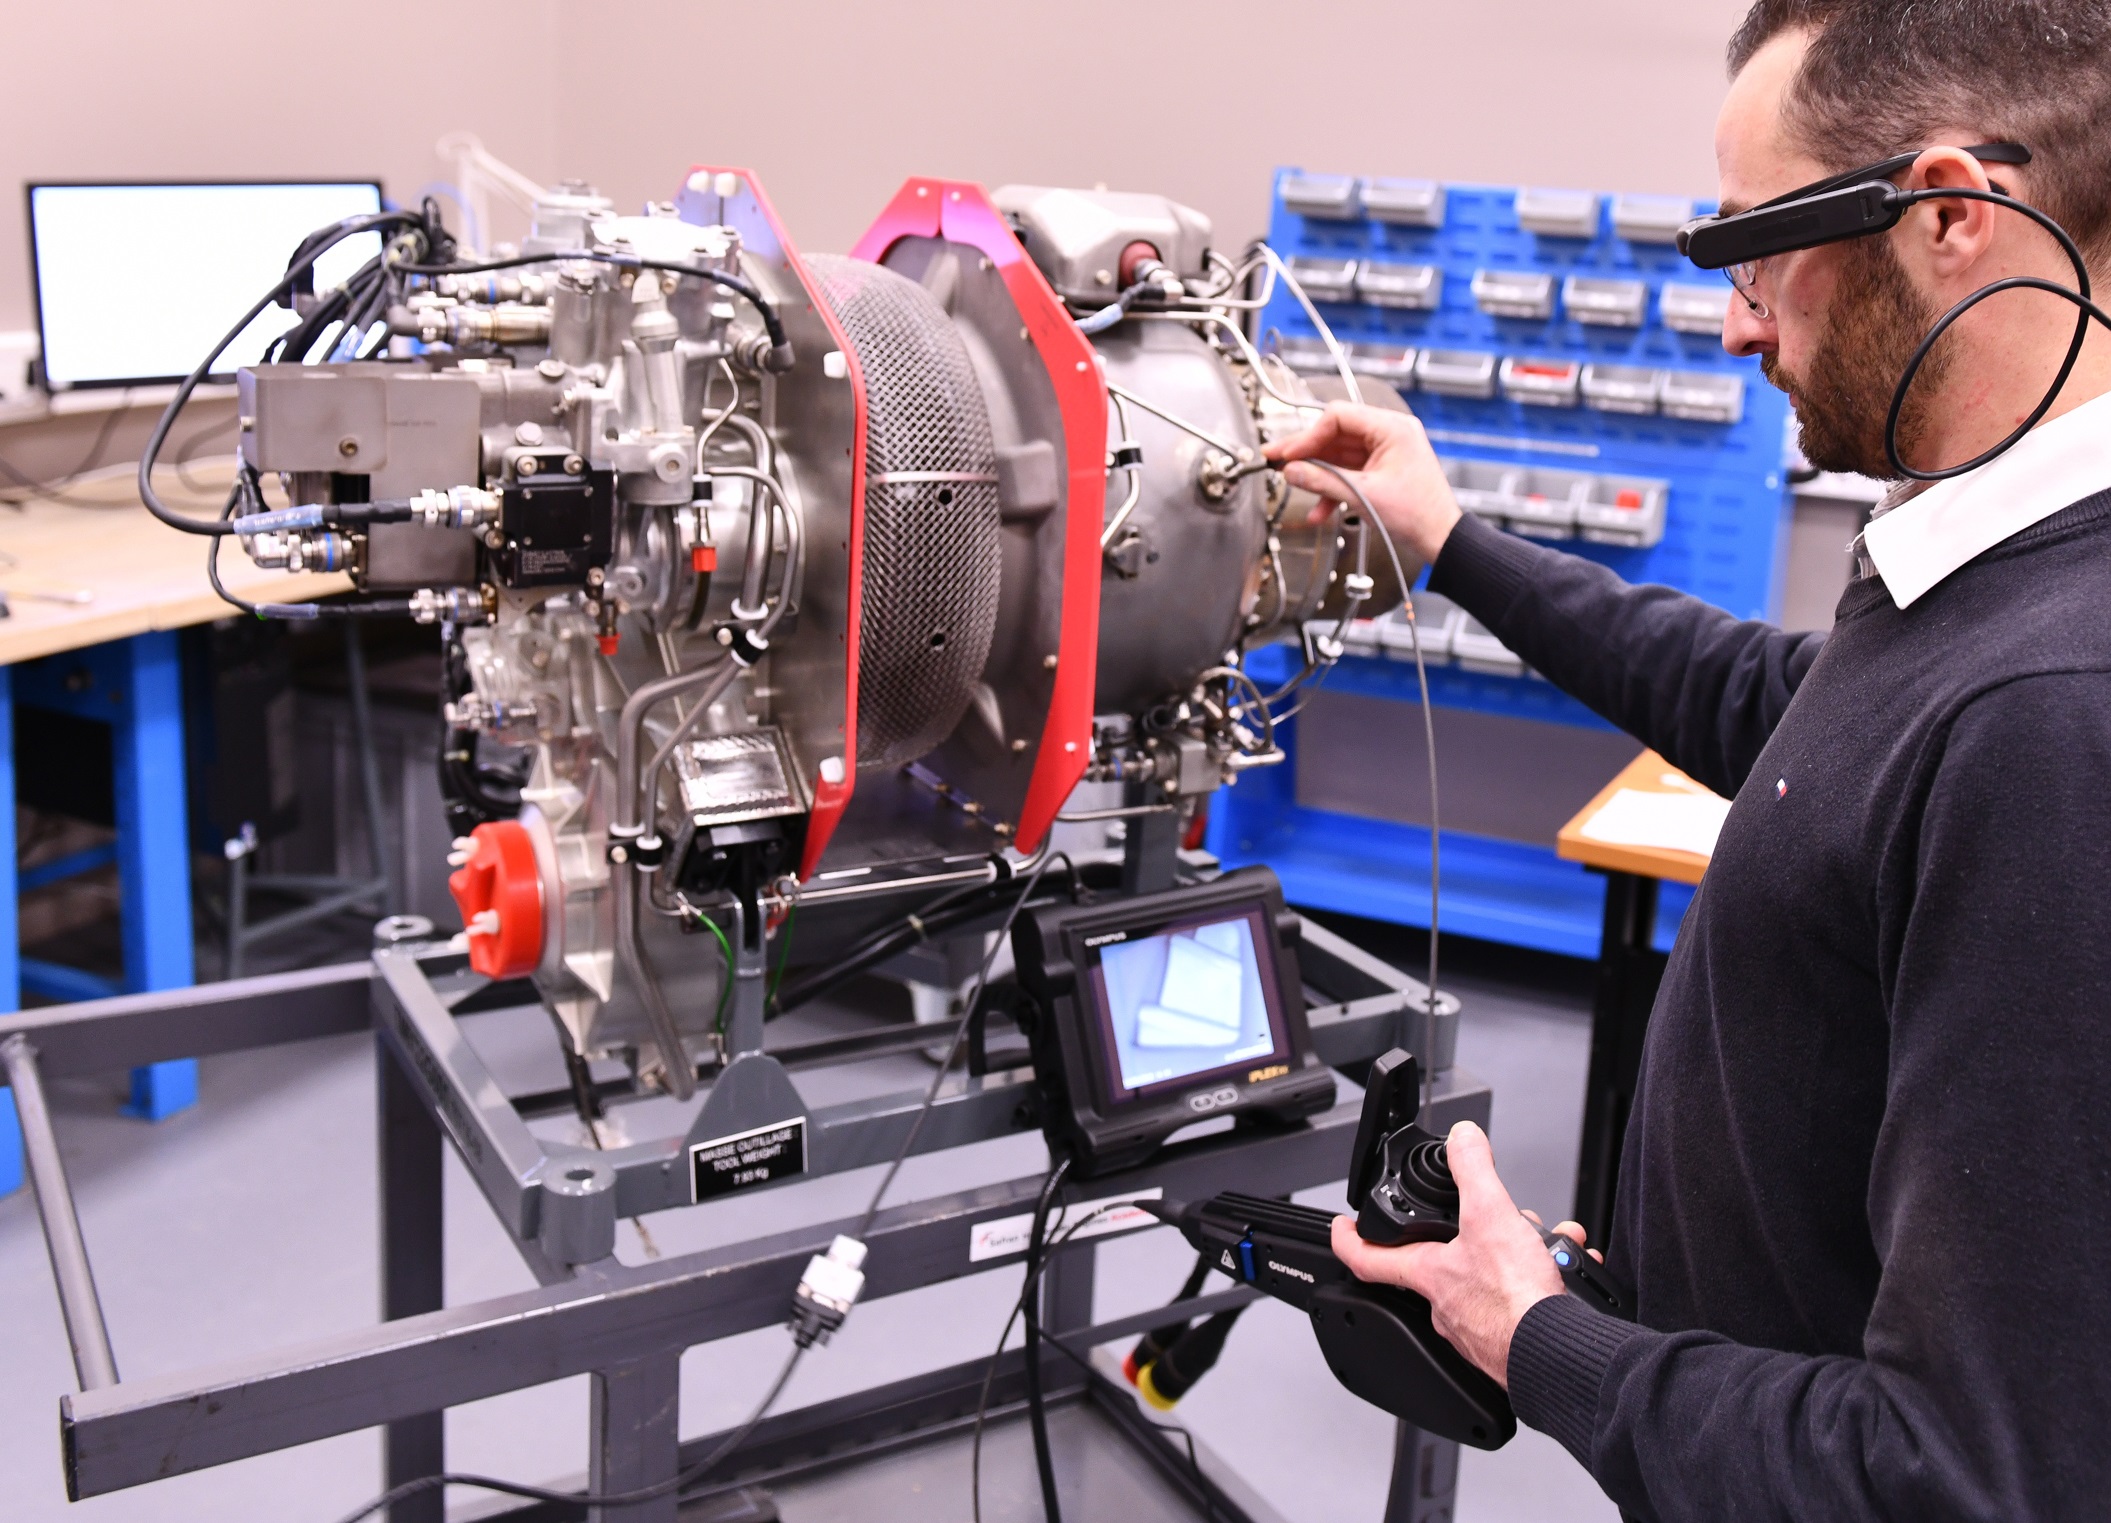 Expert link is a new video assistance service that allows Safran customers to connect, through a secure, live video feed, with Safran Helicopter Engines experts to help with technical diagnosis or guidance through a maintenance task. Safran Helicopter Engines Photo